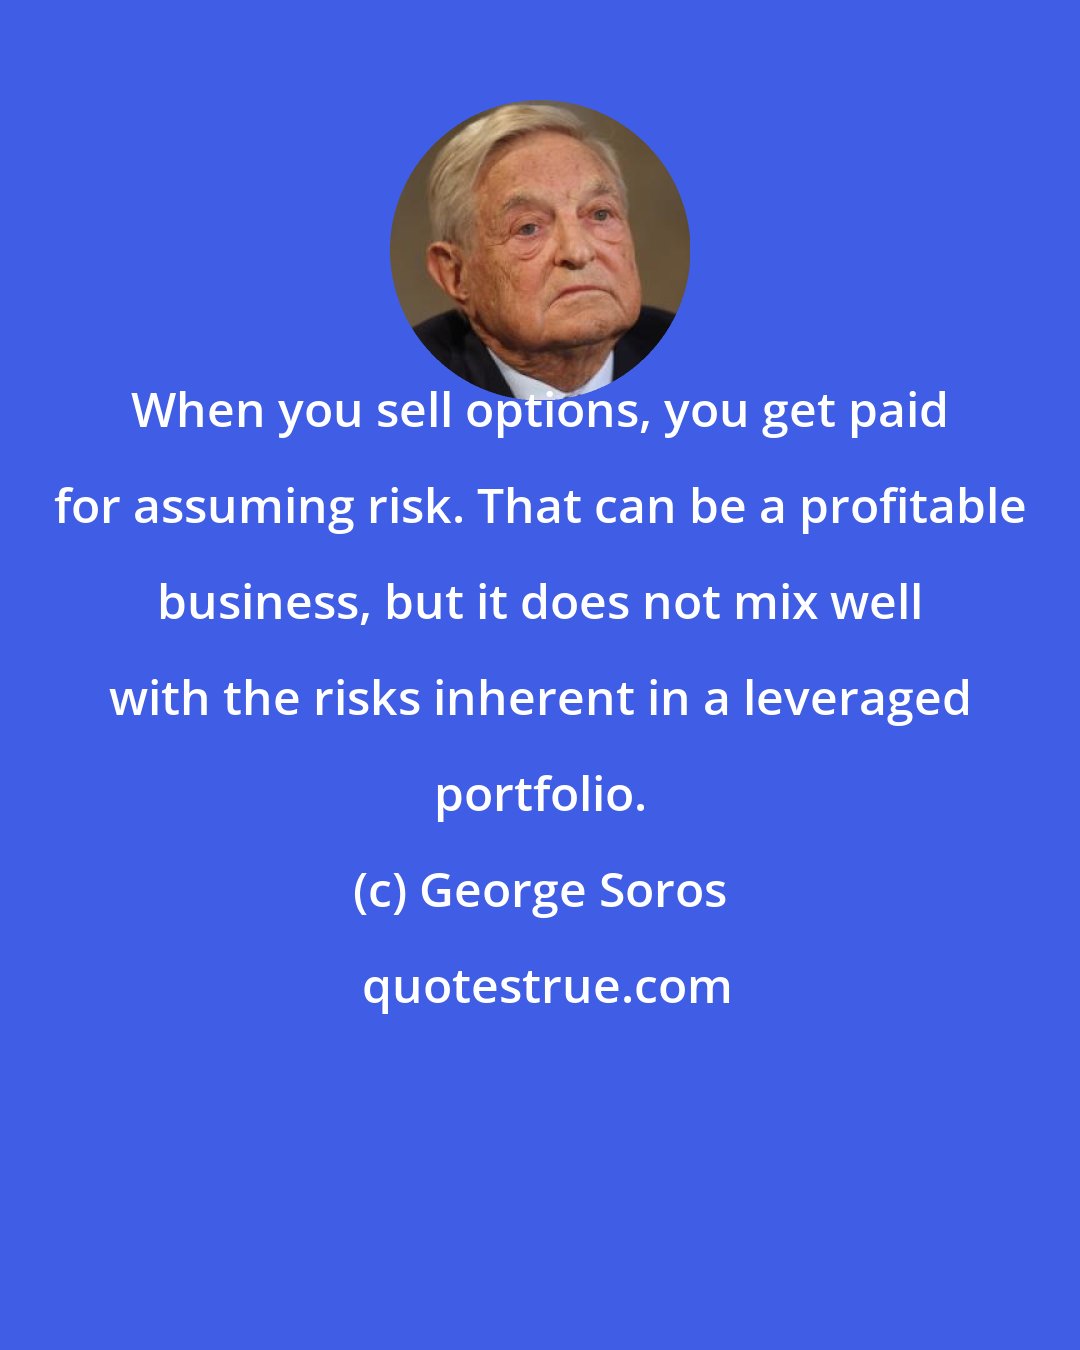 George Soros: When you sell options, you get paid for assuming risk. That can be a profitable business, but it does not mix well with the risks inherent in a leveraged portfolio.